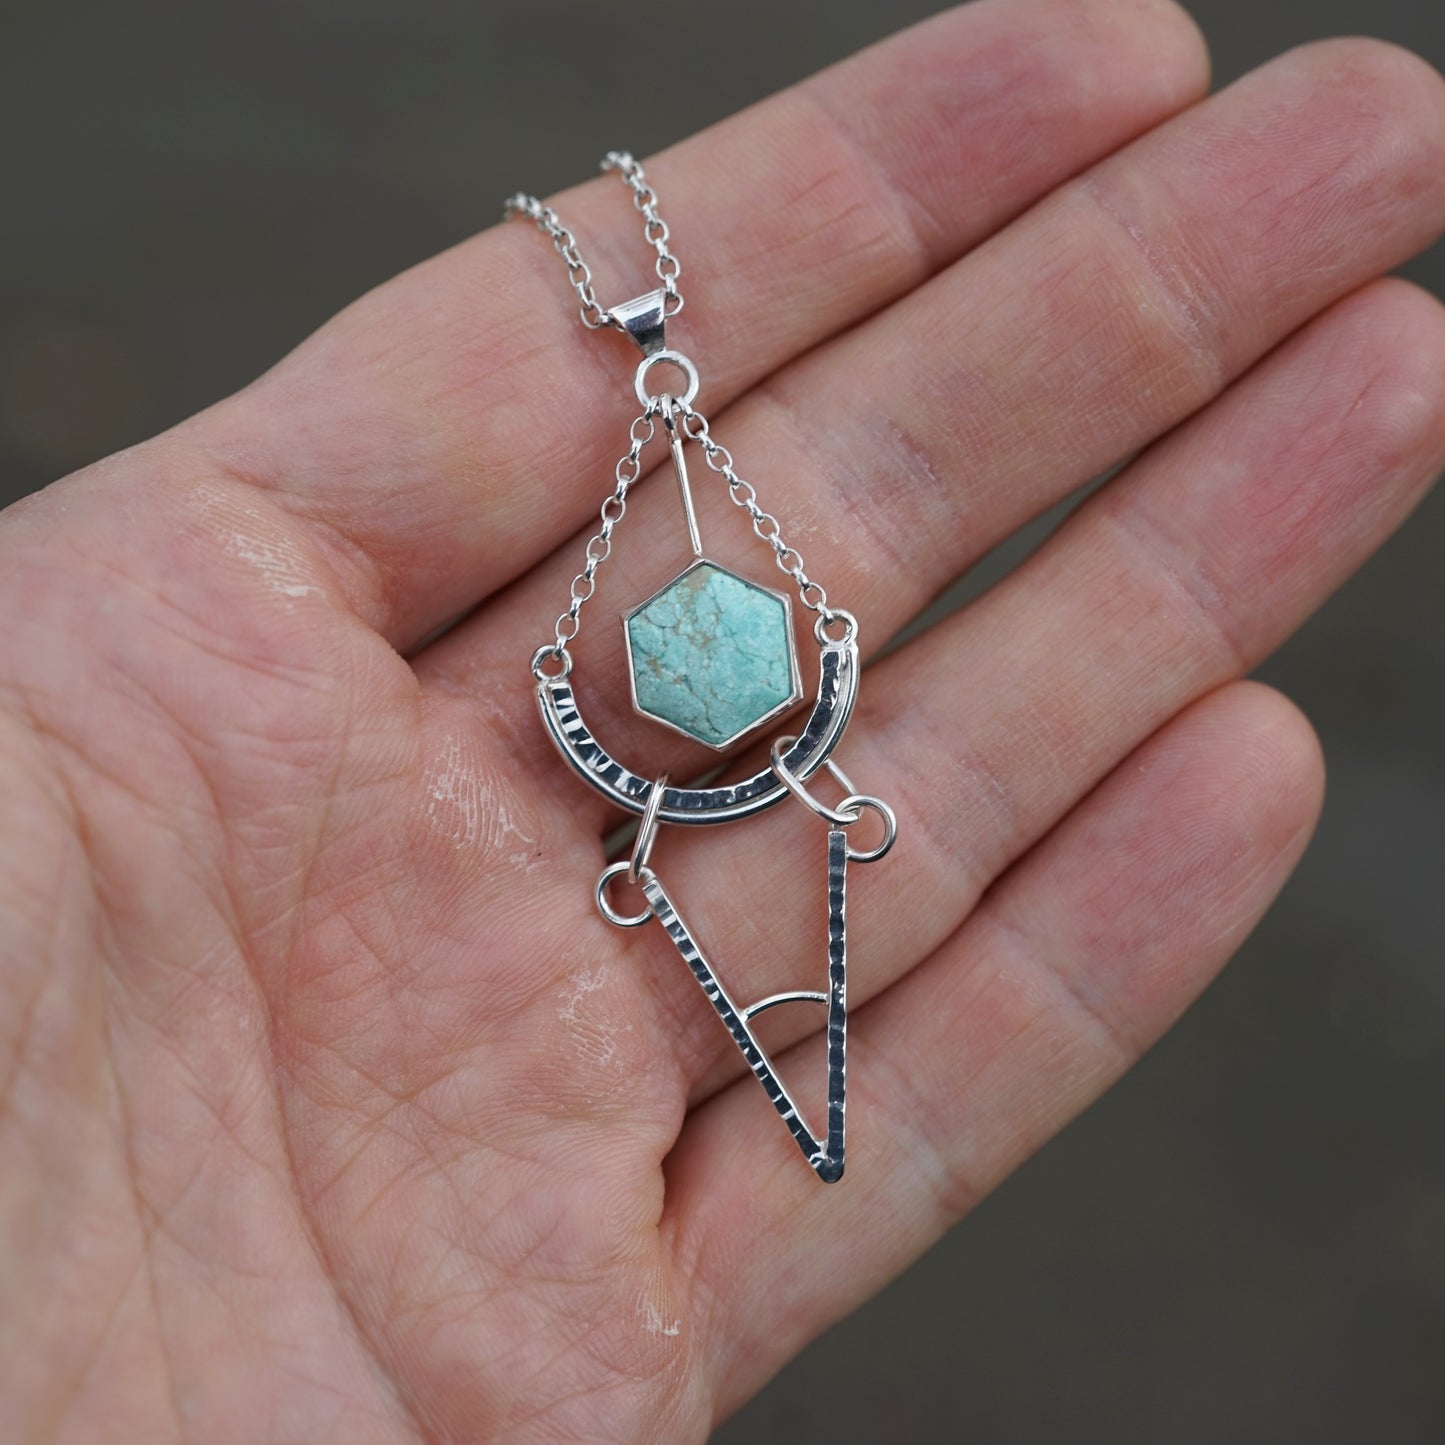 Australian Turquoise and 925 Sterling Silver Pendant